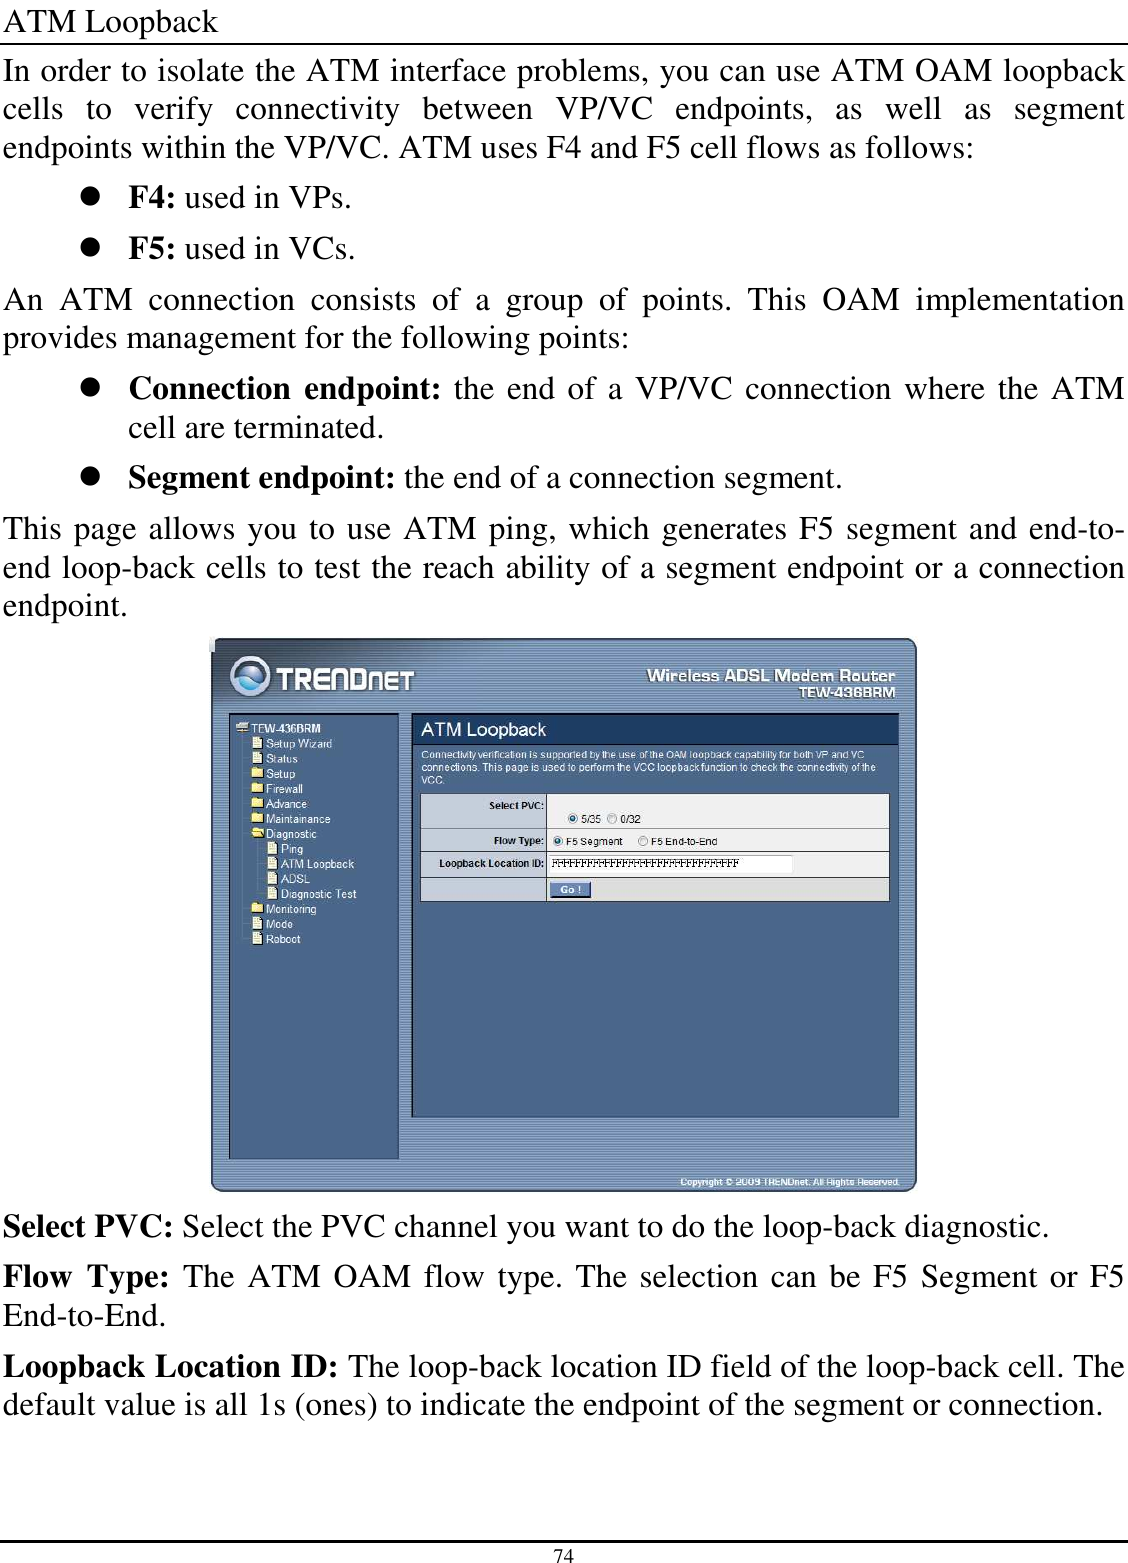 74 ATM Loopback In order to isolate the ATM interface problems, you can use ATM OAM loopback cells  to  verify  connectivity  between  VP/VC  endpoints,  as  well  as  segment endpoints within the VP/VC. ATM uses F4 and F5 cell flows as follows:  F4: used in VPs.  F5: used in VCs. An  ATM  connection  consists  of  a  group  of  points.  This  OAM  implementation provides management for the following points:  Connection endpoint: the end of a VP/VC connection where the ATM cell are terminated.  Segment endpoint: the end of a connection segment. This page allows you to use ATM ping, which generates F5 segment and end-to-end loop-back cells to test the reach ability of a segment endpoint or a connection endpoint.  Select PVC: Select the PVC channel you want to do the loop-back diagnostic. Flow Type: The ATM OAM flow type. The selection can be F5 Segment or F5 End-to-End. Loopback Location ID: The loop-back location ID field of the loop-back cell. The default value is all 1s (ones) to indicate the endpoint of the segment or connection. 